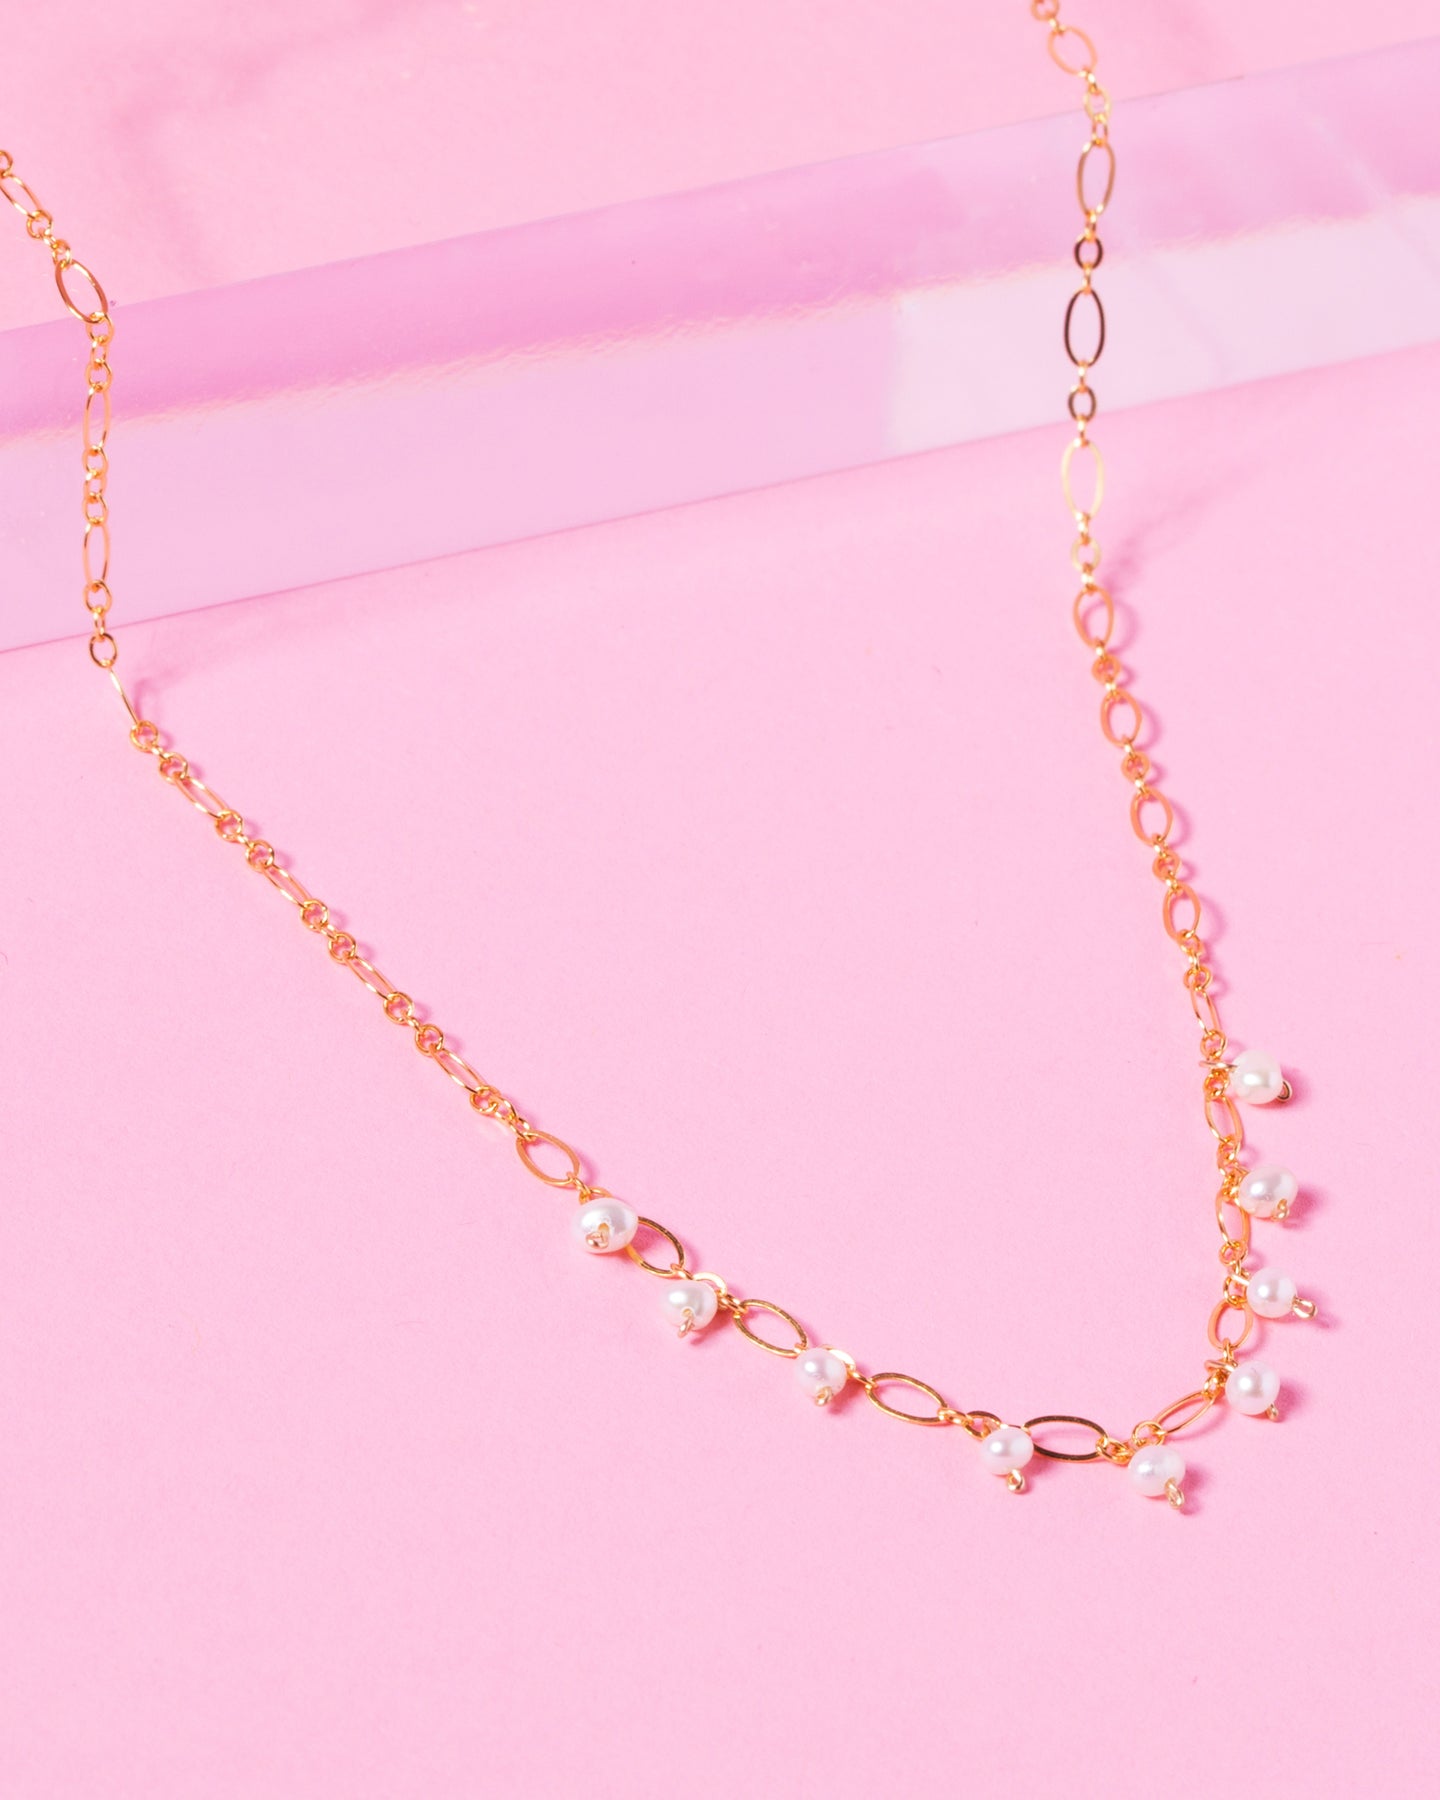 PEARL OLIVIA 14K GOLD FILLED FANCY CHAIN NECKLACE